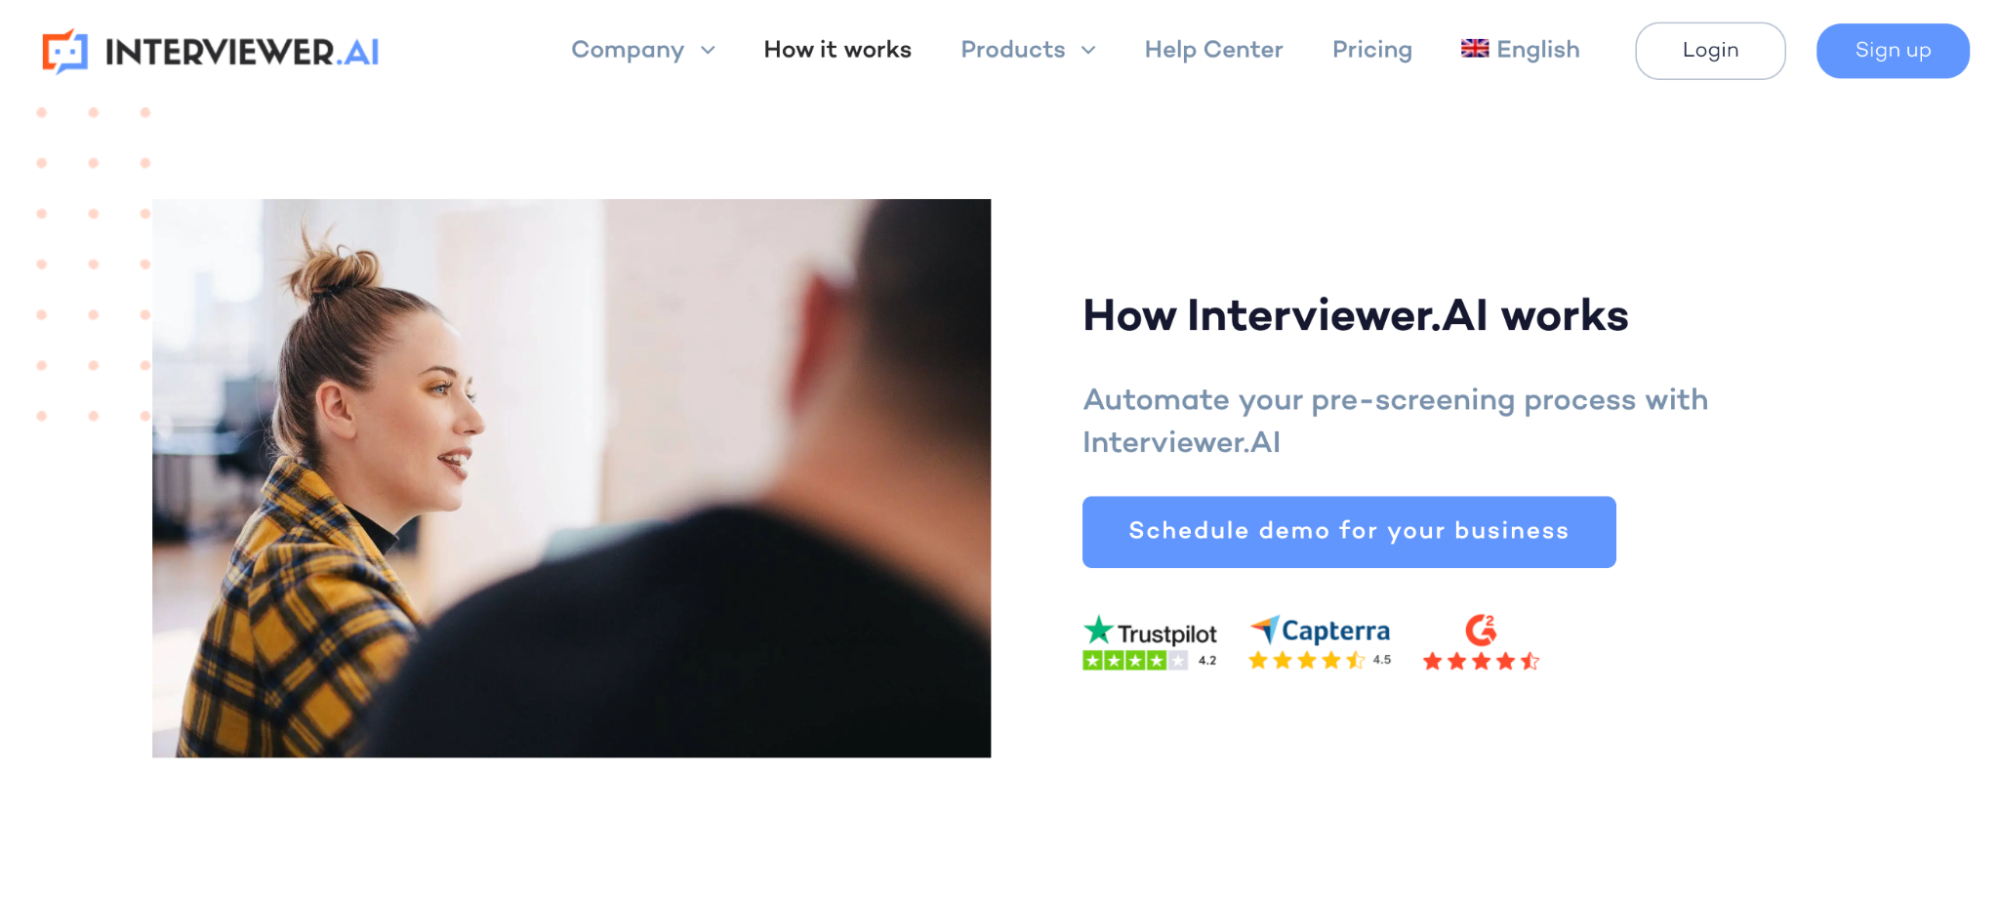 Interviewer.AI’s quality-control processes 